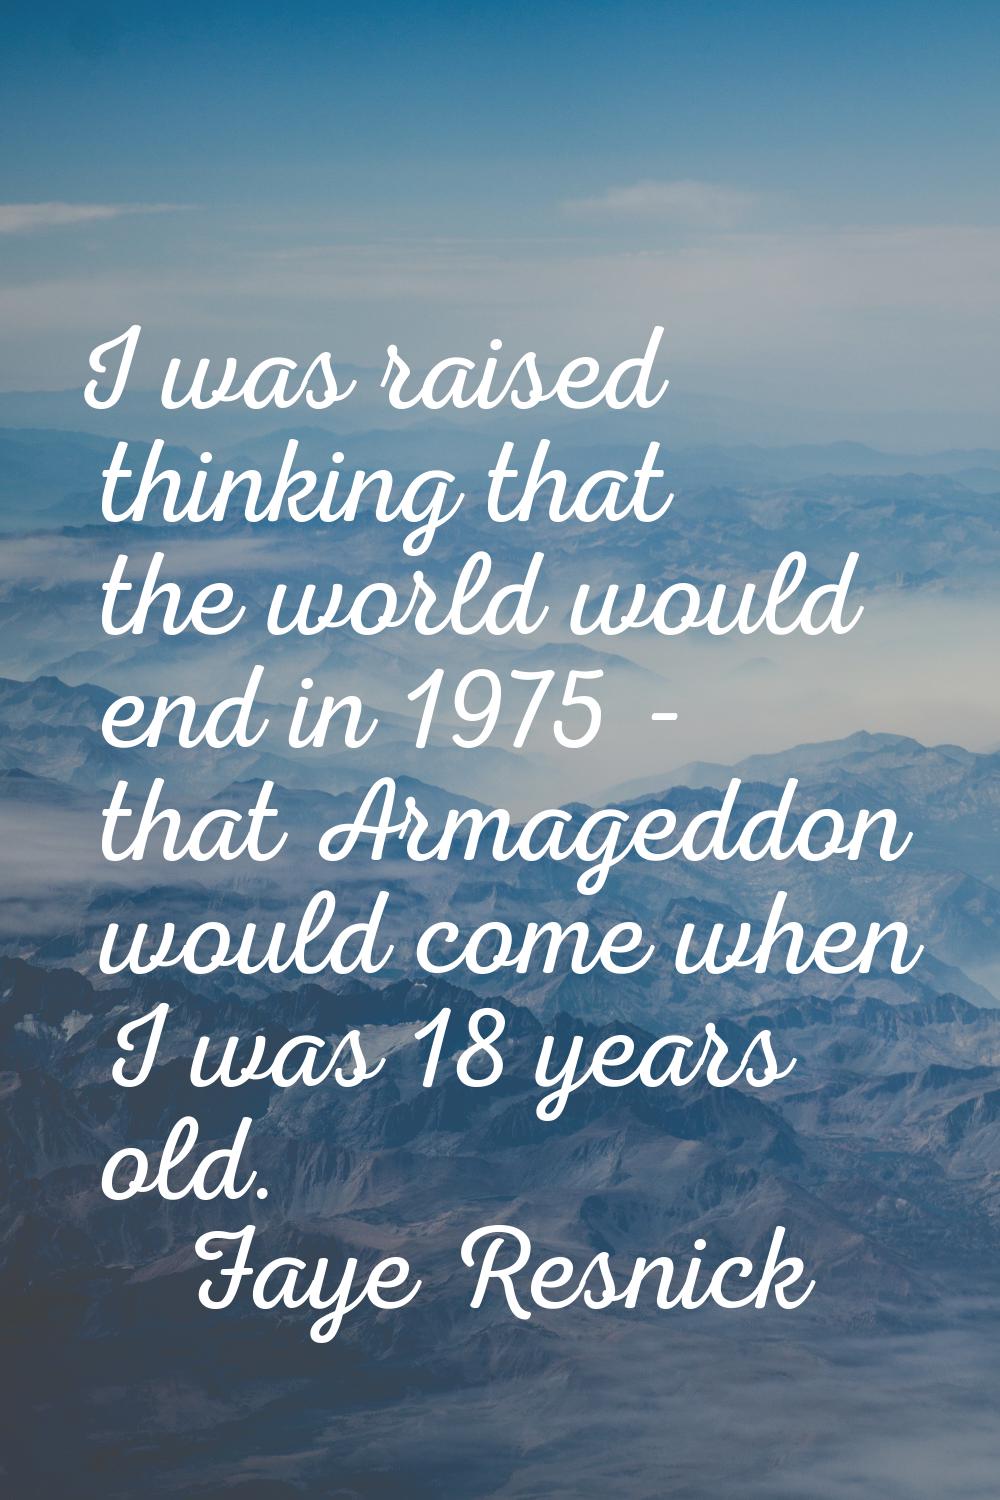 I was raised thinking that the world would end in 1975 - that Armageddon would come when I was 18 y